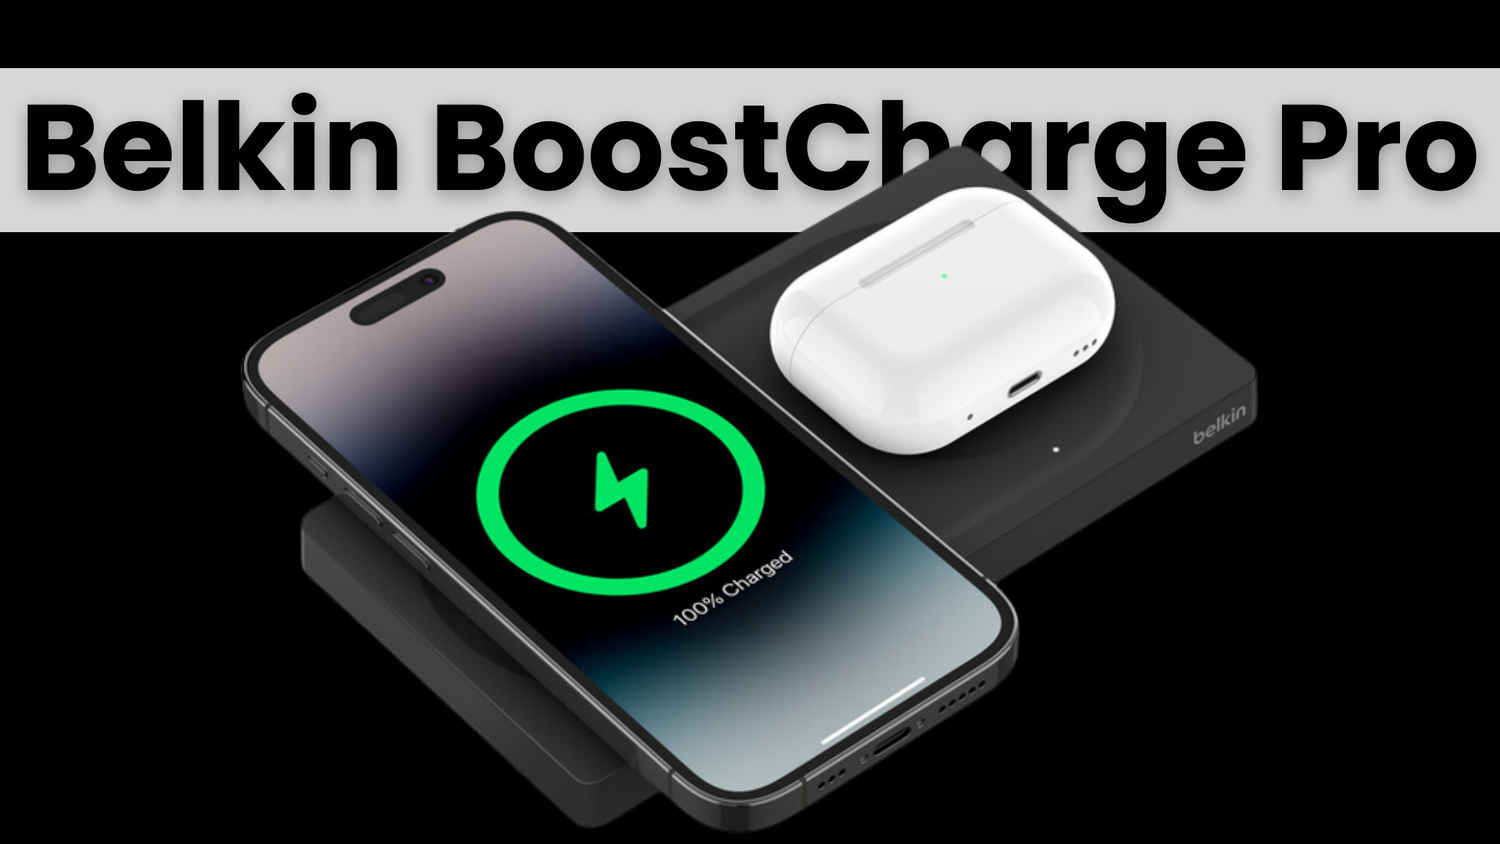 Belkin BoostCharge Pro (2-in-1) — Worth the price tag?